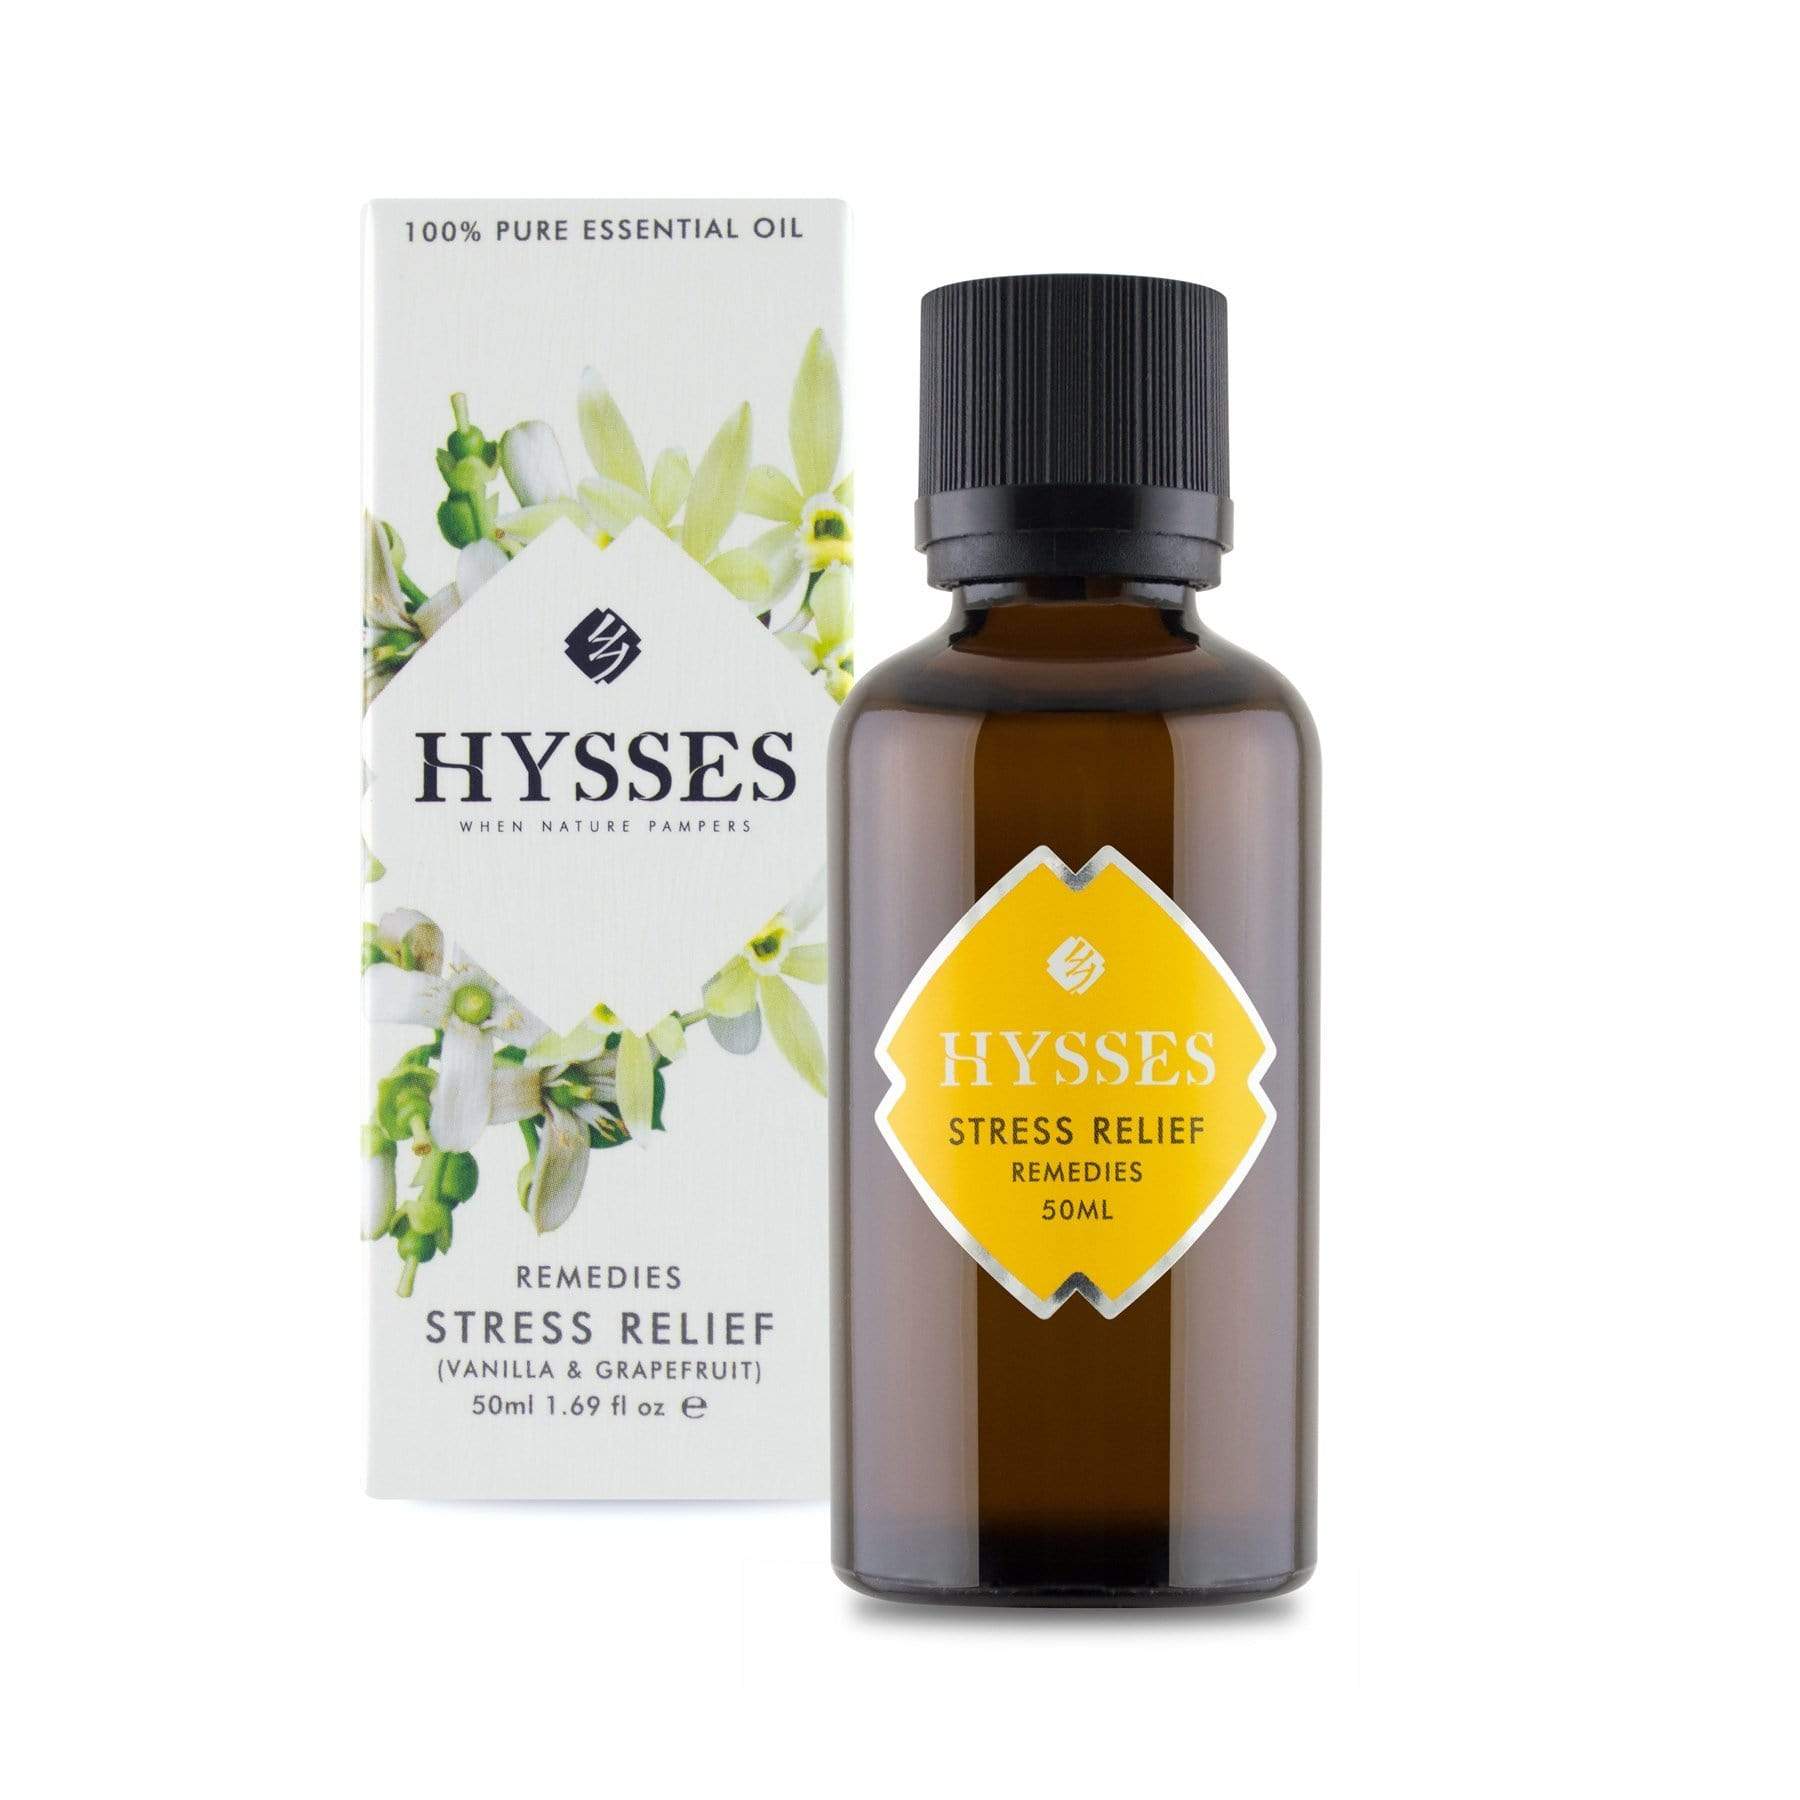 Hysses Essential Oil 10ml Remedies, Stress Relief